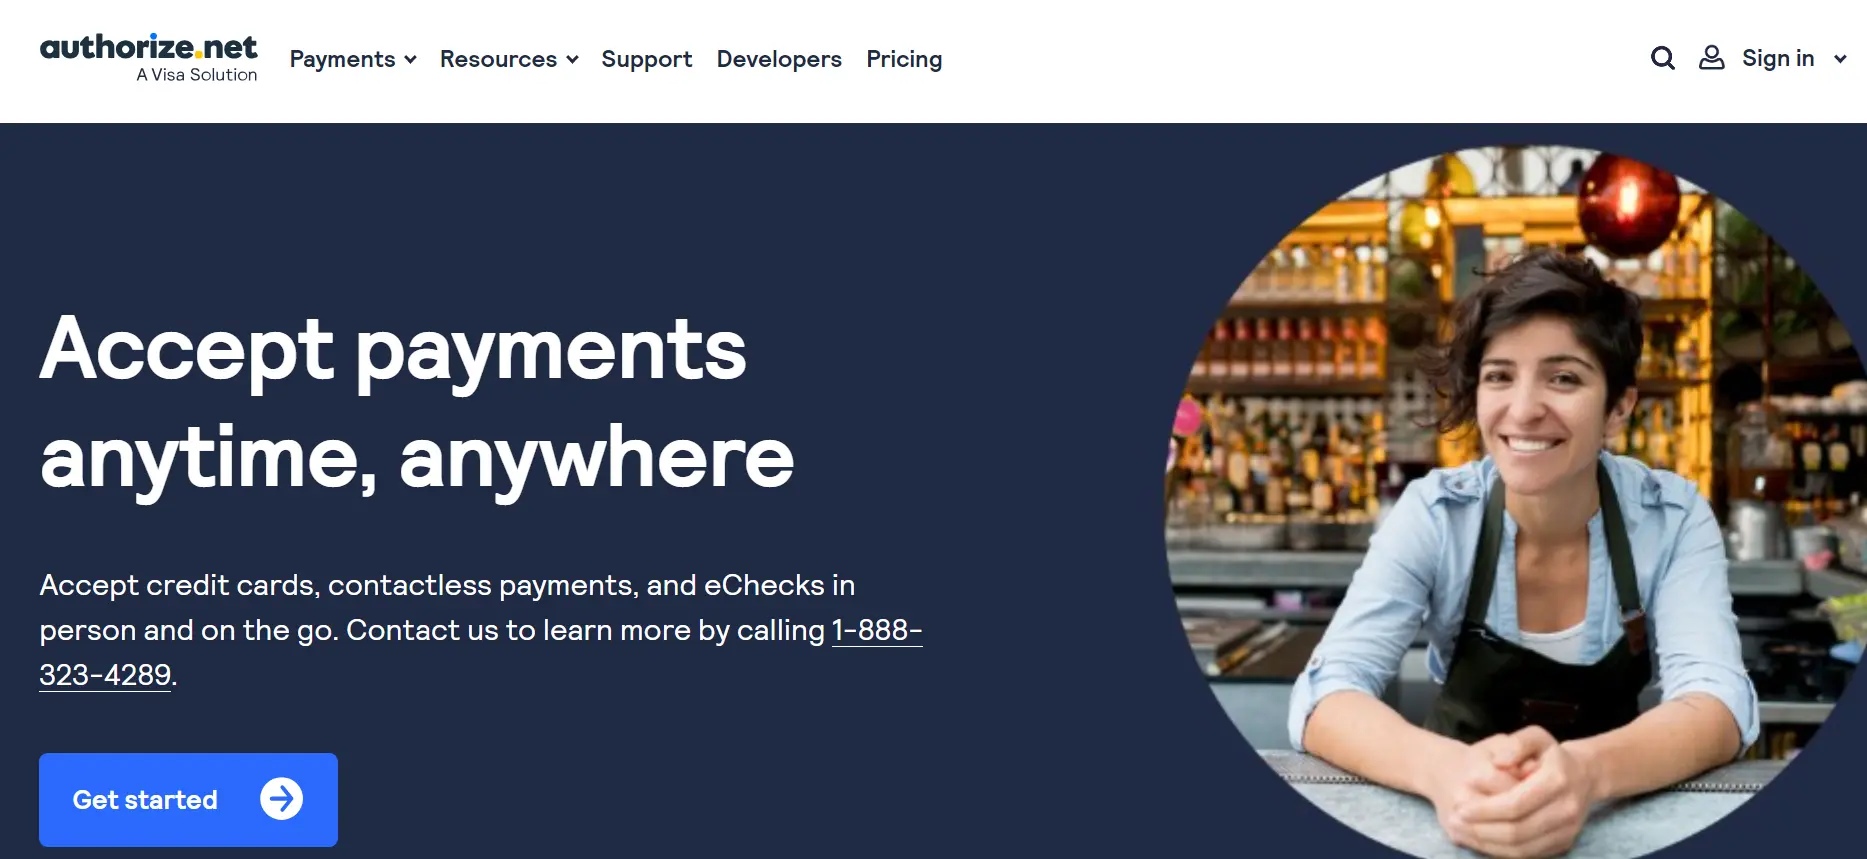 10 Best Online Payment Methods for Small Business